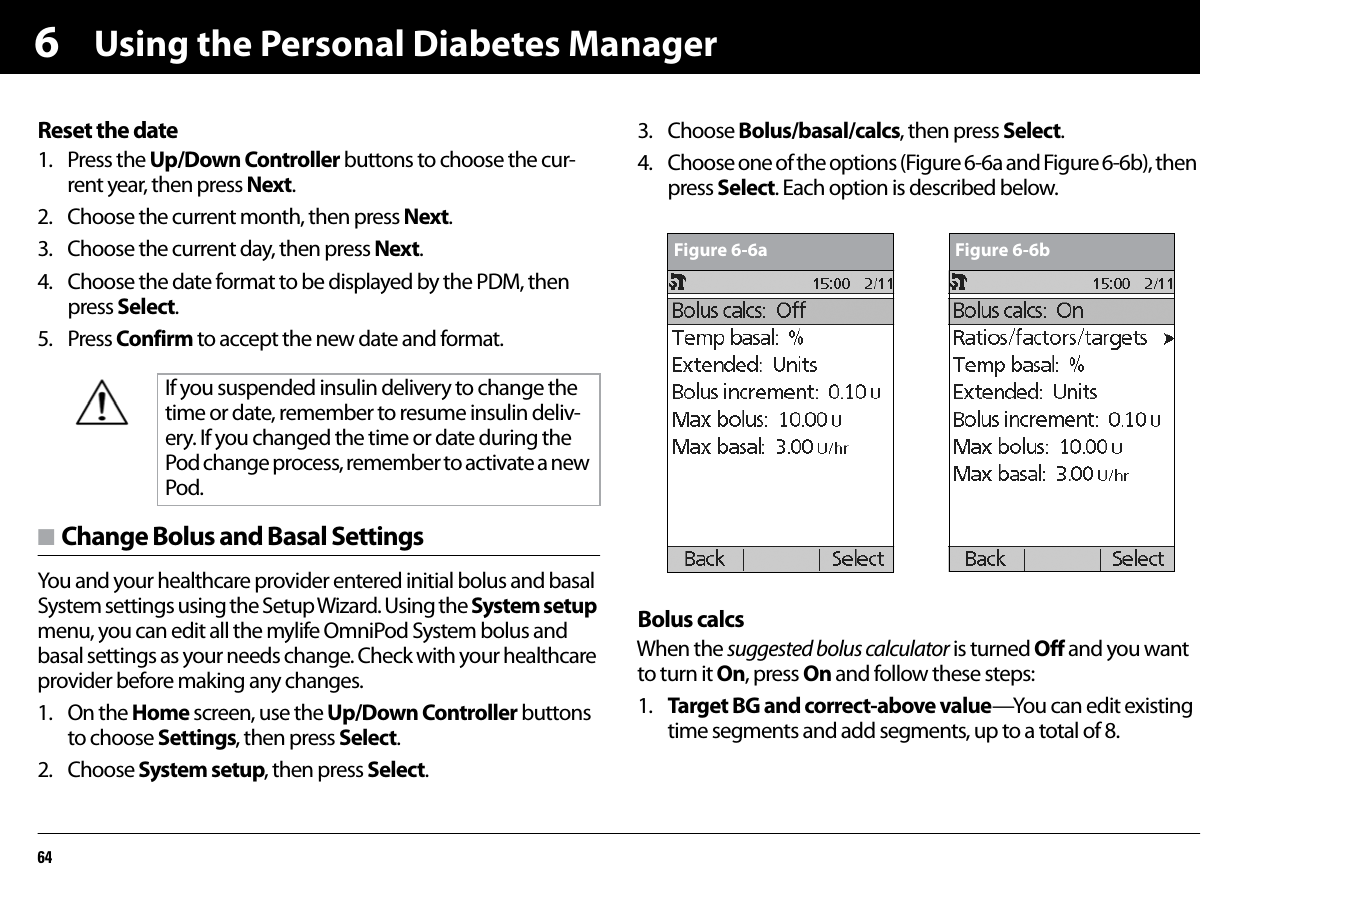 Using the Personal Diabetes Manager646Reset the date1. Press the Up/Down Controller buttons to choose the cur-rent year, then press Next.2. Choose the current month, then press Next.3. Choose the current day, then press Next.4. Choose the date format to be displayed by the PDM, then press Select.5. Press Confirm to accept the new date and format.n Change Bolus and Basal SettingsYou and your healthcare provider entered initial bolus and basal System settings using the Setup Wizard. Using the System setup menu, you can edit all the mylife OmniPod System bolus and basal settings as your needs change. Check with your healthcare provider before making any changes.1. On the Home screen, use the Up/Down Controller buttons to choose Settings, then press Select.2. Choose System setup, then press Select.3. Choose Bolus/basal/calcs, then press Select.4. Choose one of the options (Figure 6-6a and Figure 6-6b), then press Select. Each option is described below.Bolus calcsWhen the suggested bolus calculator is turned Off and you want to turn it On, press On and follow these steps:1. Target BG and correct-above value—You can edit existing time segments and add segments, up to a total of 8.If you suspended insulin delivery to change the time or date, remember to resume insulin deliv-ery. If you changed the time or date during the Pod change process, remember to activate a new Pod.Figure 6-6a Figure 6-6b